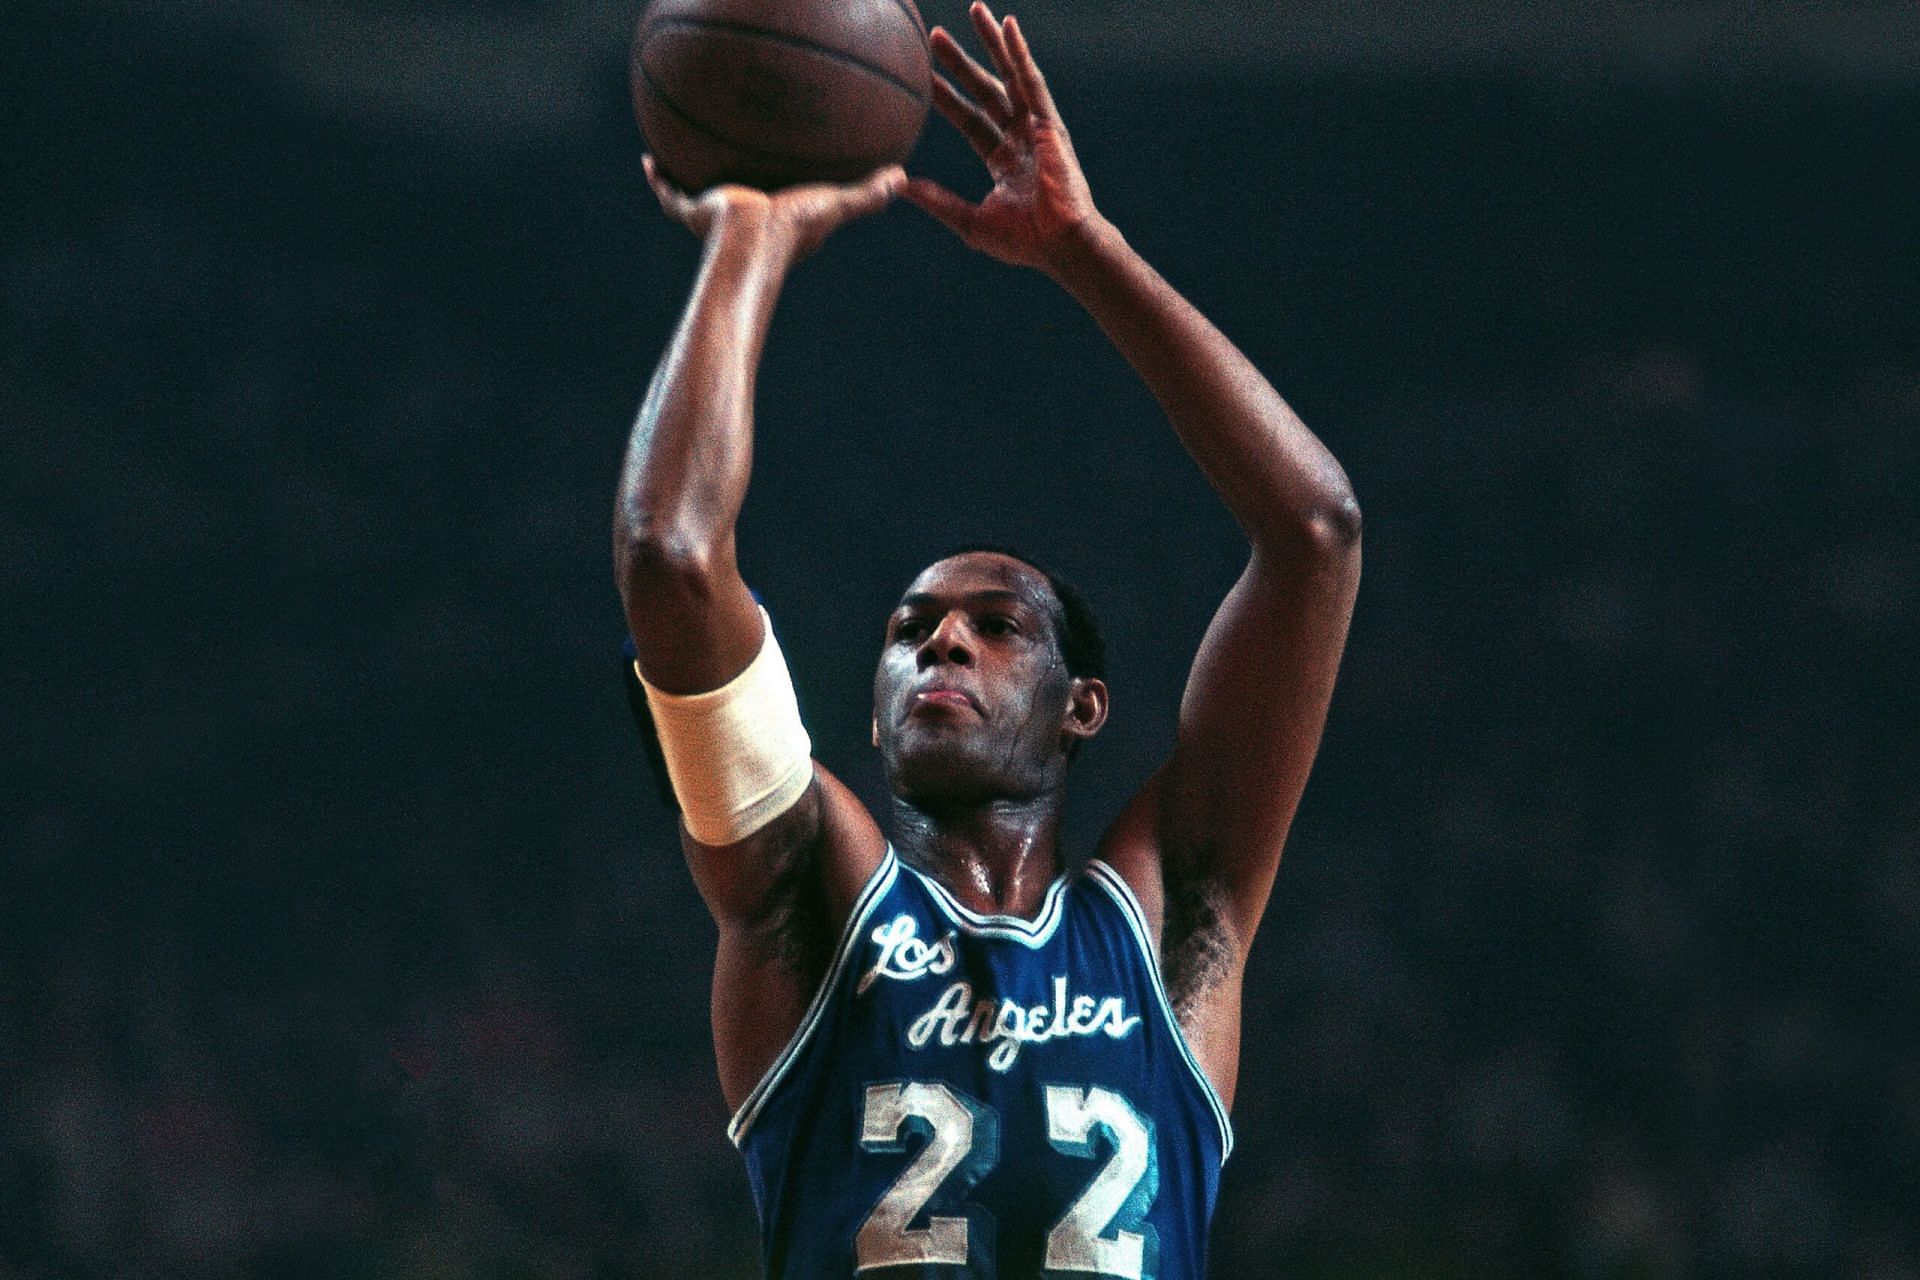 Elgin Baylor was known for being one of the greatest scorers in NBA History